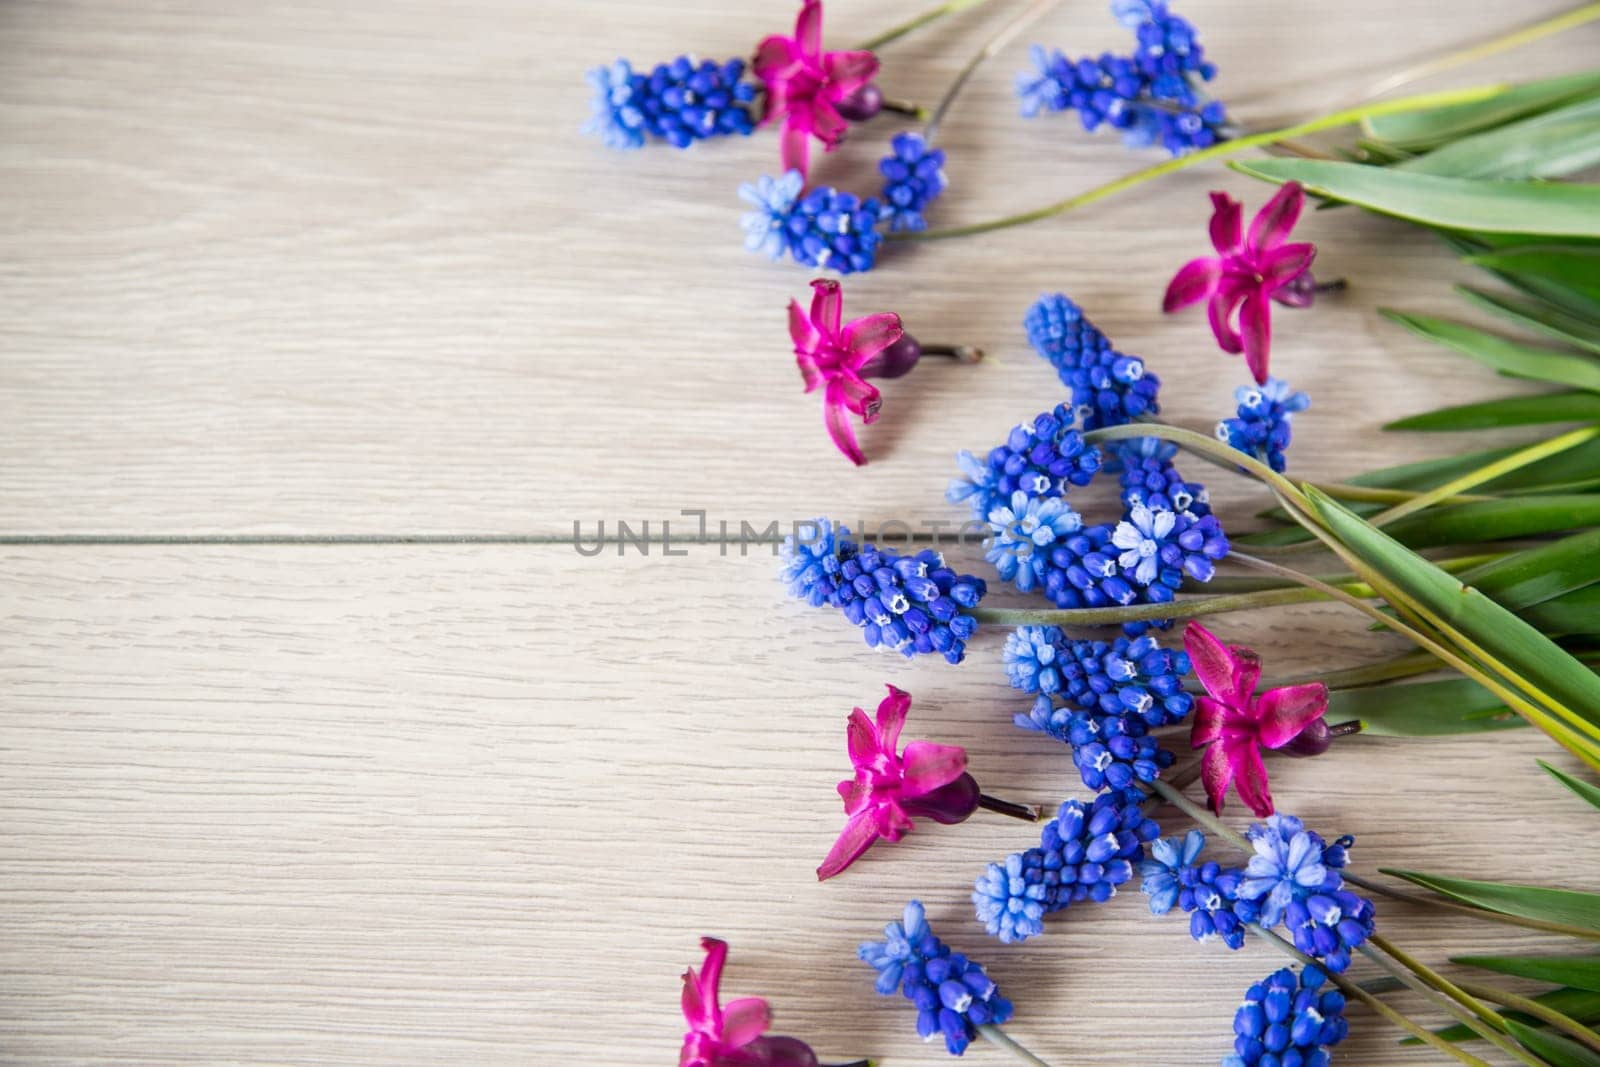 beautiful bouquet of spring flowers on a wooden table, rustic style.